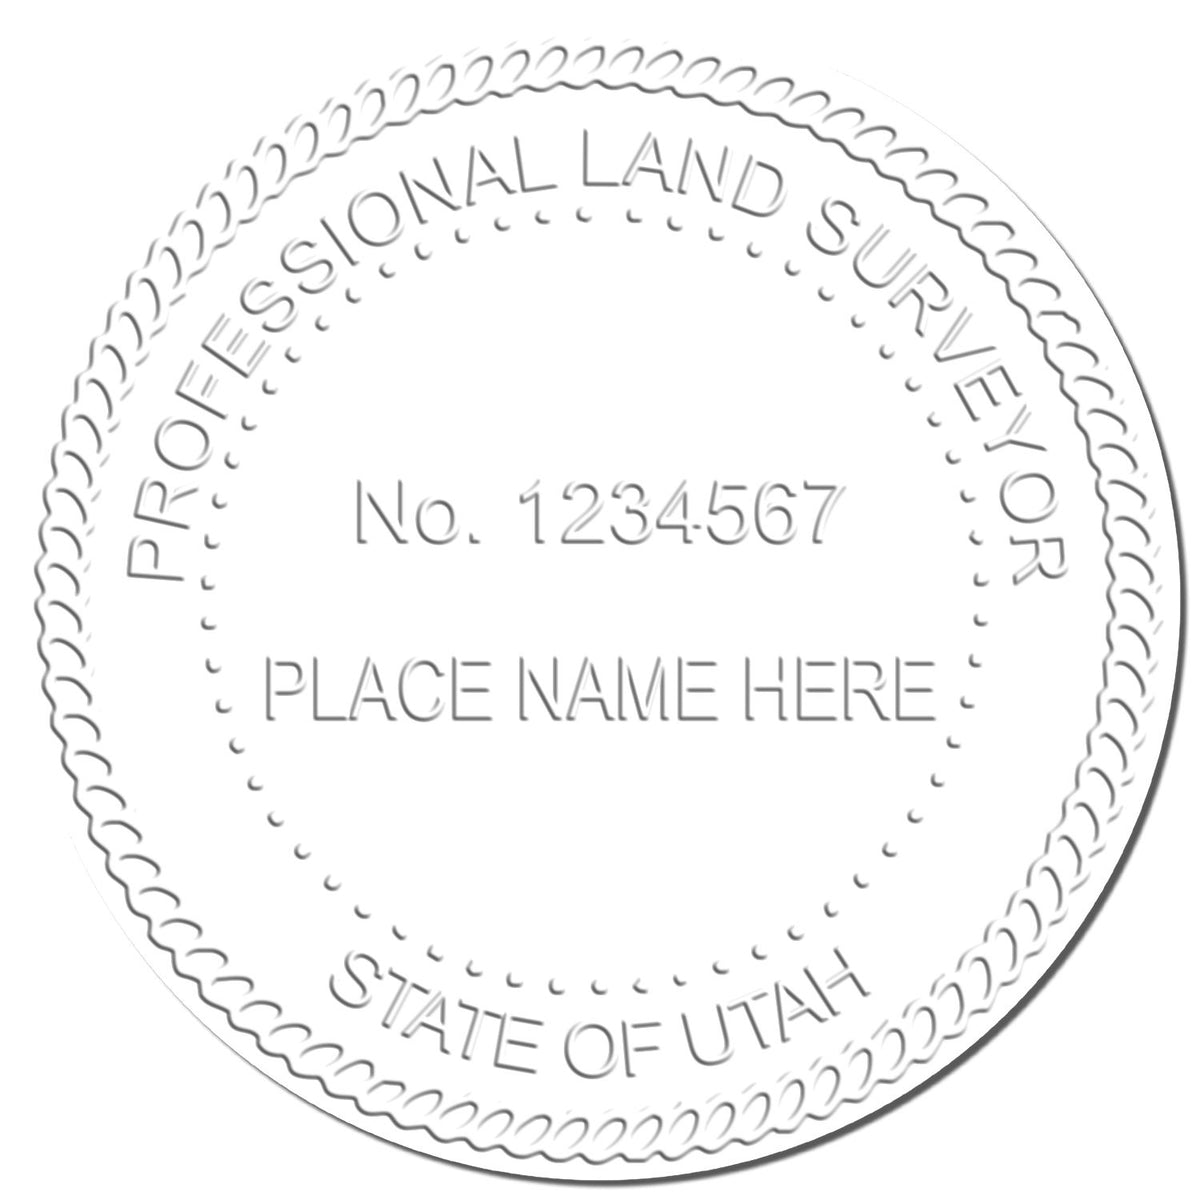 This paper is stamped with a sample imprint of the Hybrid Utah Land Surveyor Seal, signifying its quality and reliability.